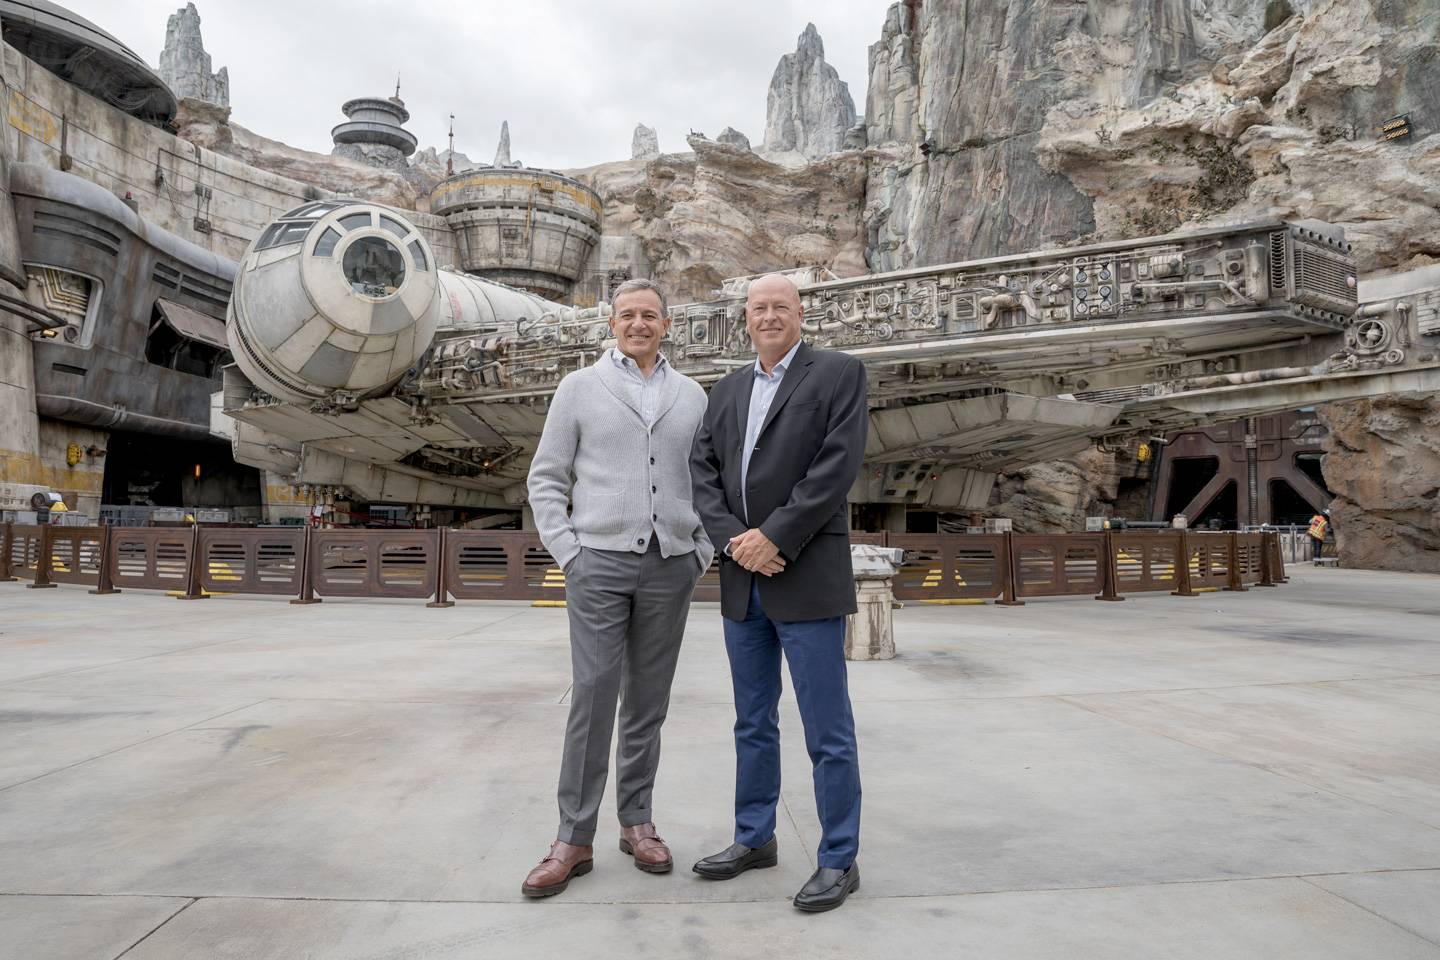 Disney Executive Chairman Bob Iger reiterates that he will leave the company on December 31 2021